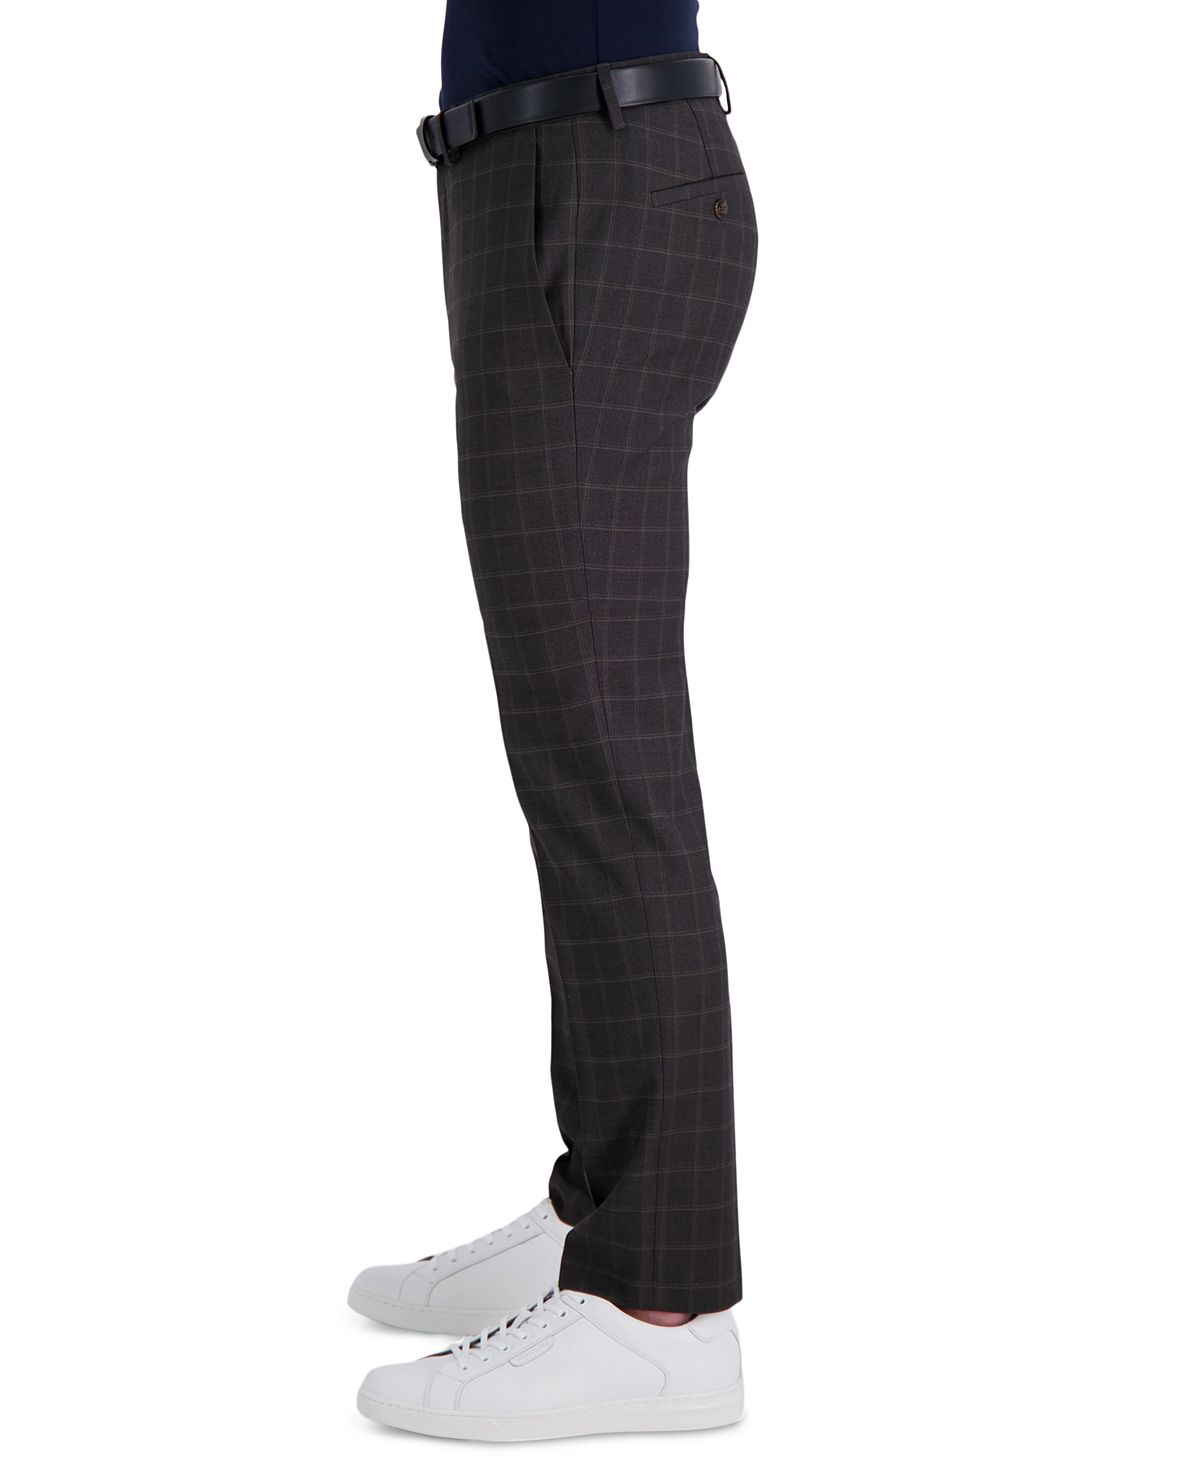 Kenneth Cole Reaction Slim-fit Stretch Dress Pants Dk. Chocolate